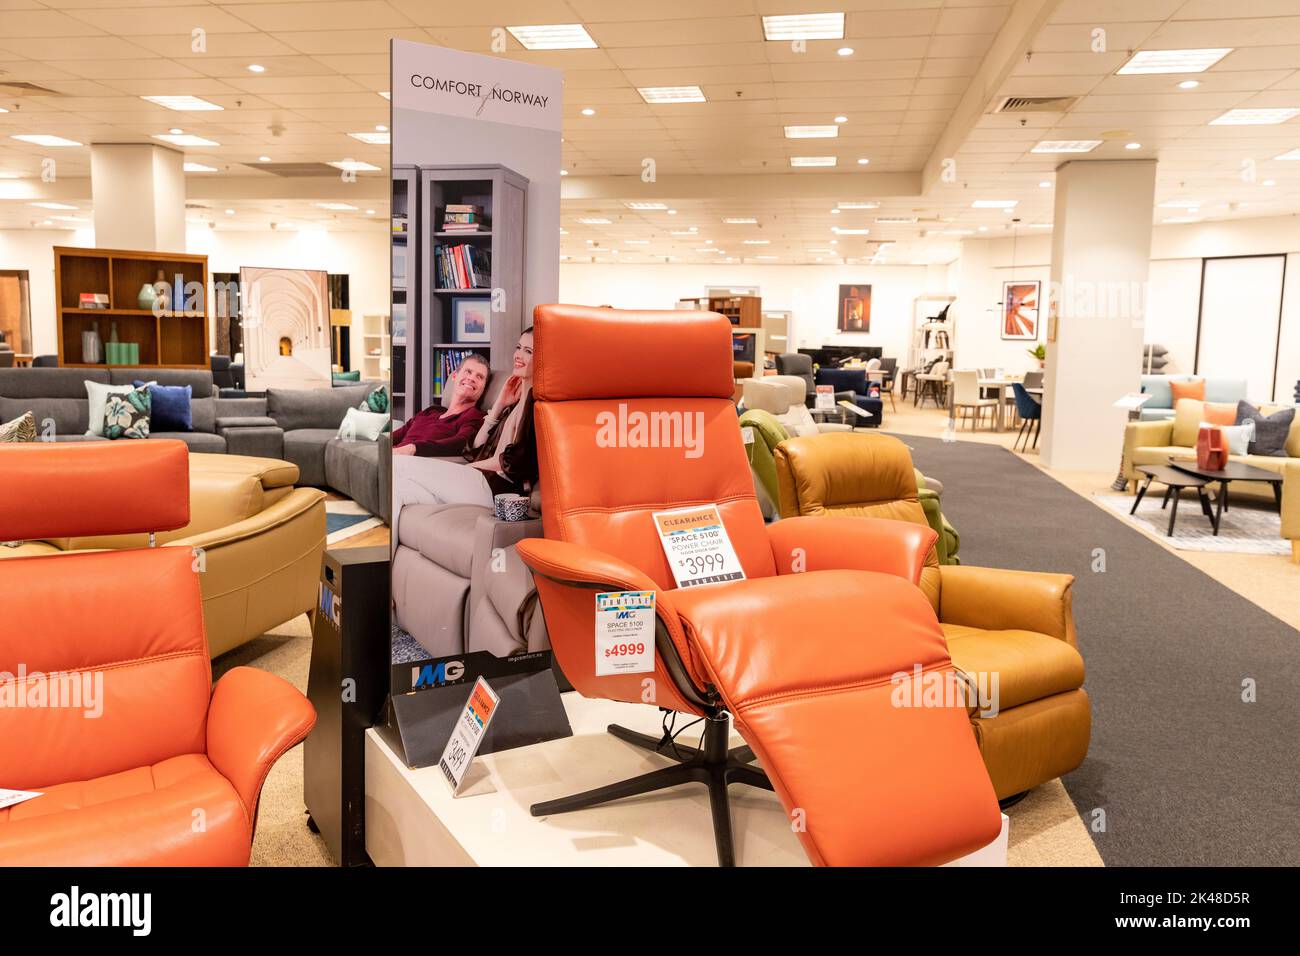 Harvey Norman Domanye furniture store in Sydney selling sofas and recliner chairs including comfort Norway space 5100 chair,NSW,Australia Stock Photo